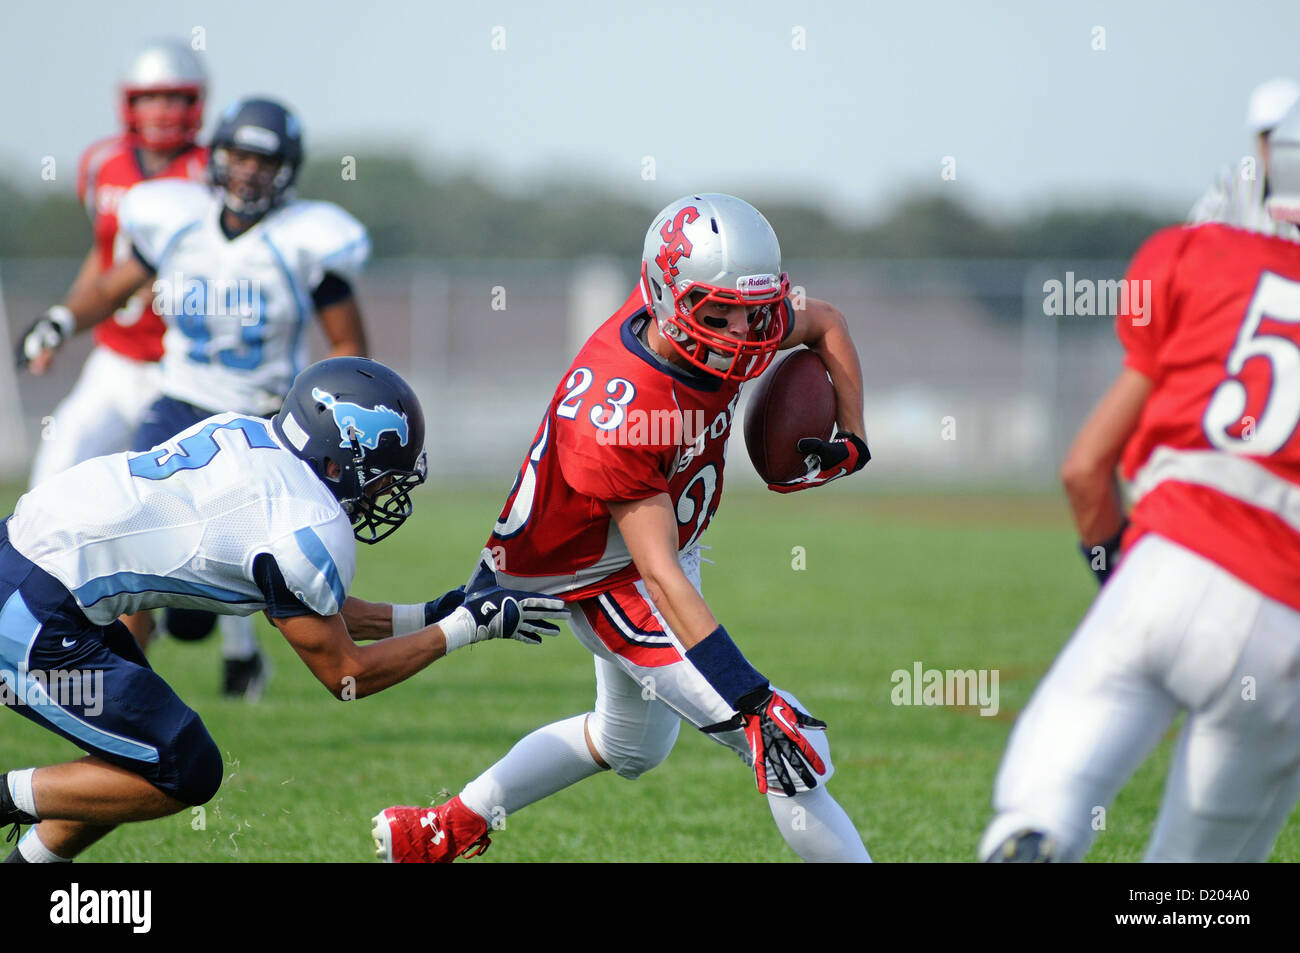 Football Wide receiver brought down by a jersey tackle during a high school game. USA. Stock Photo